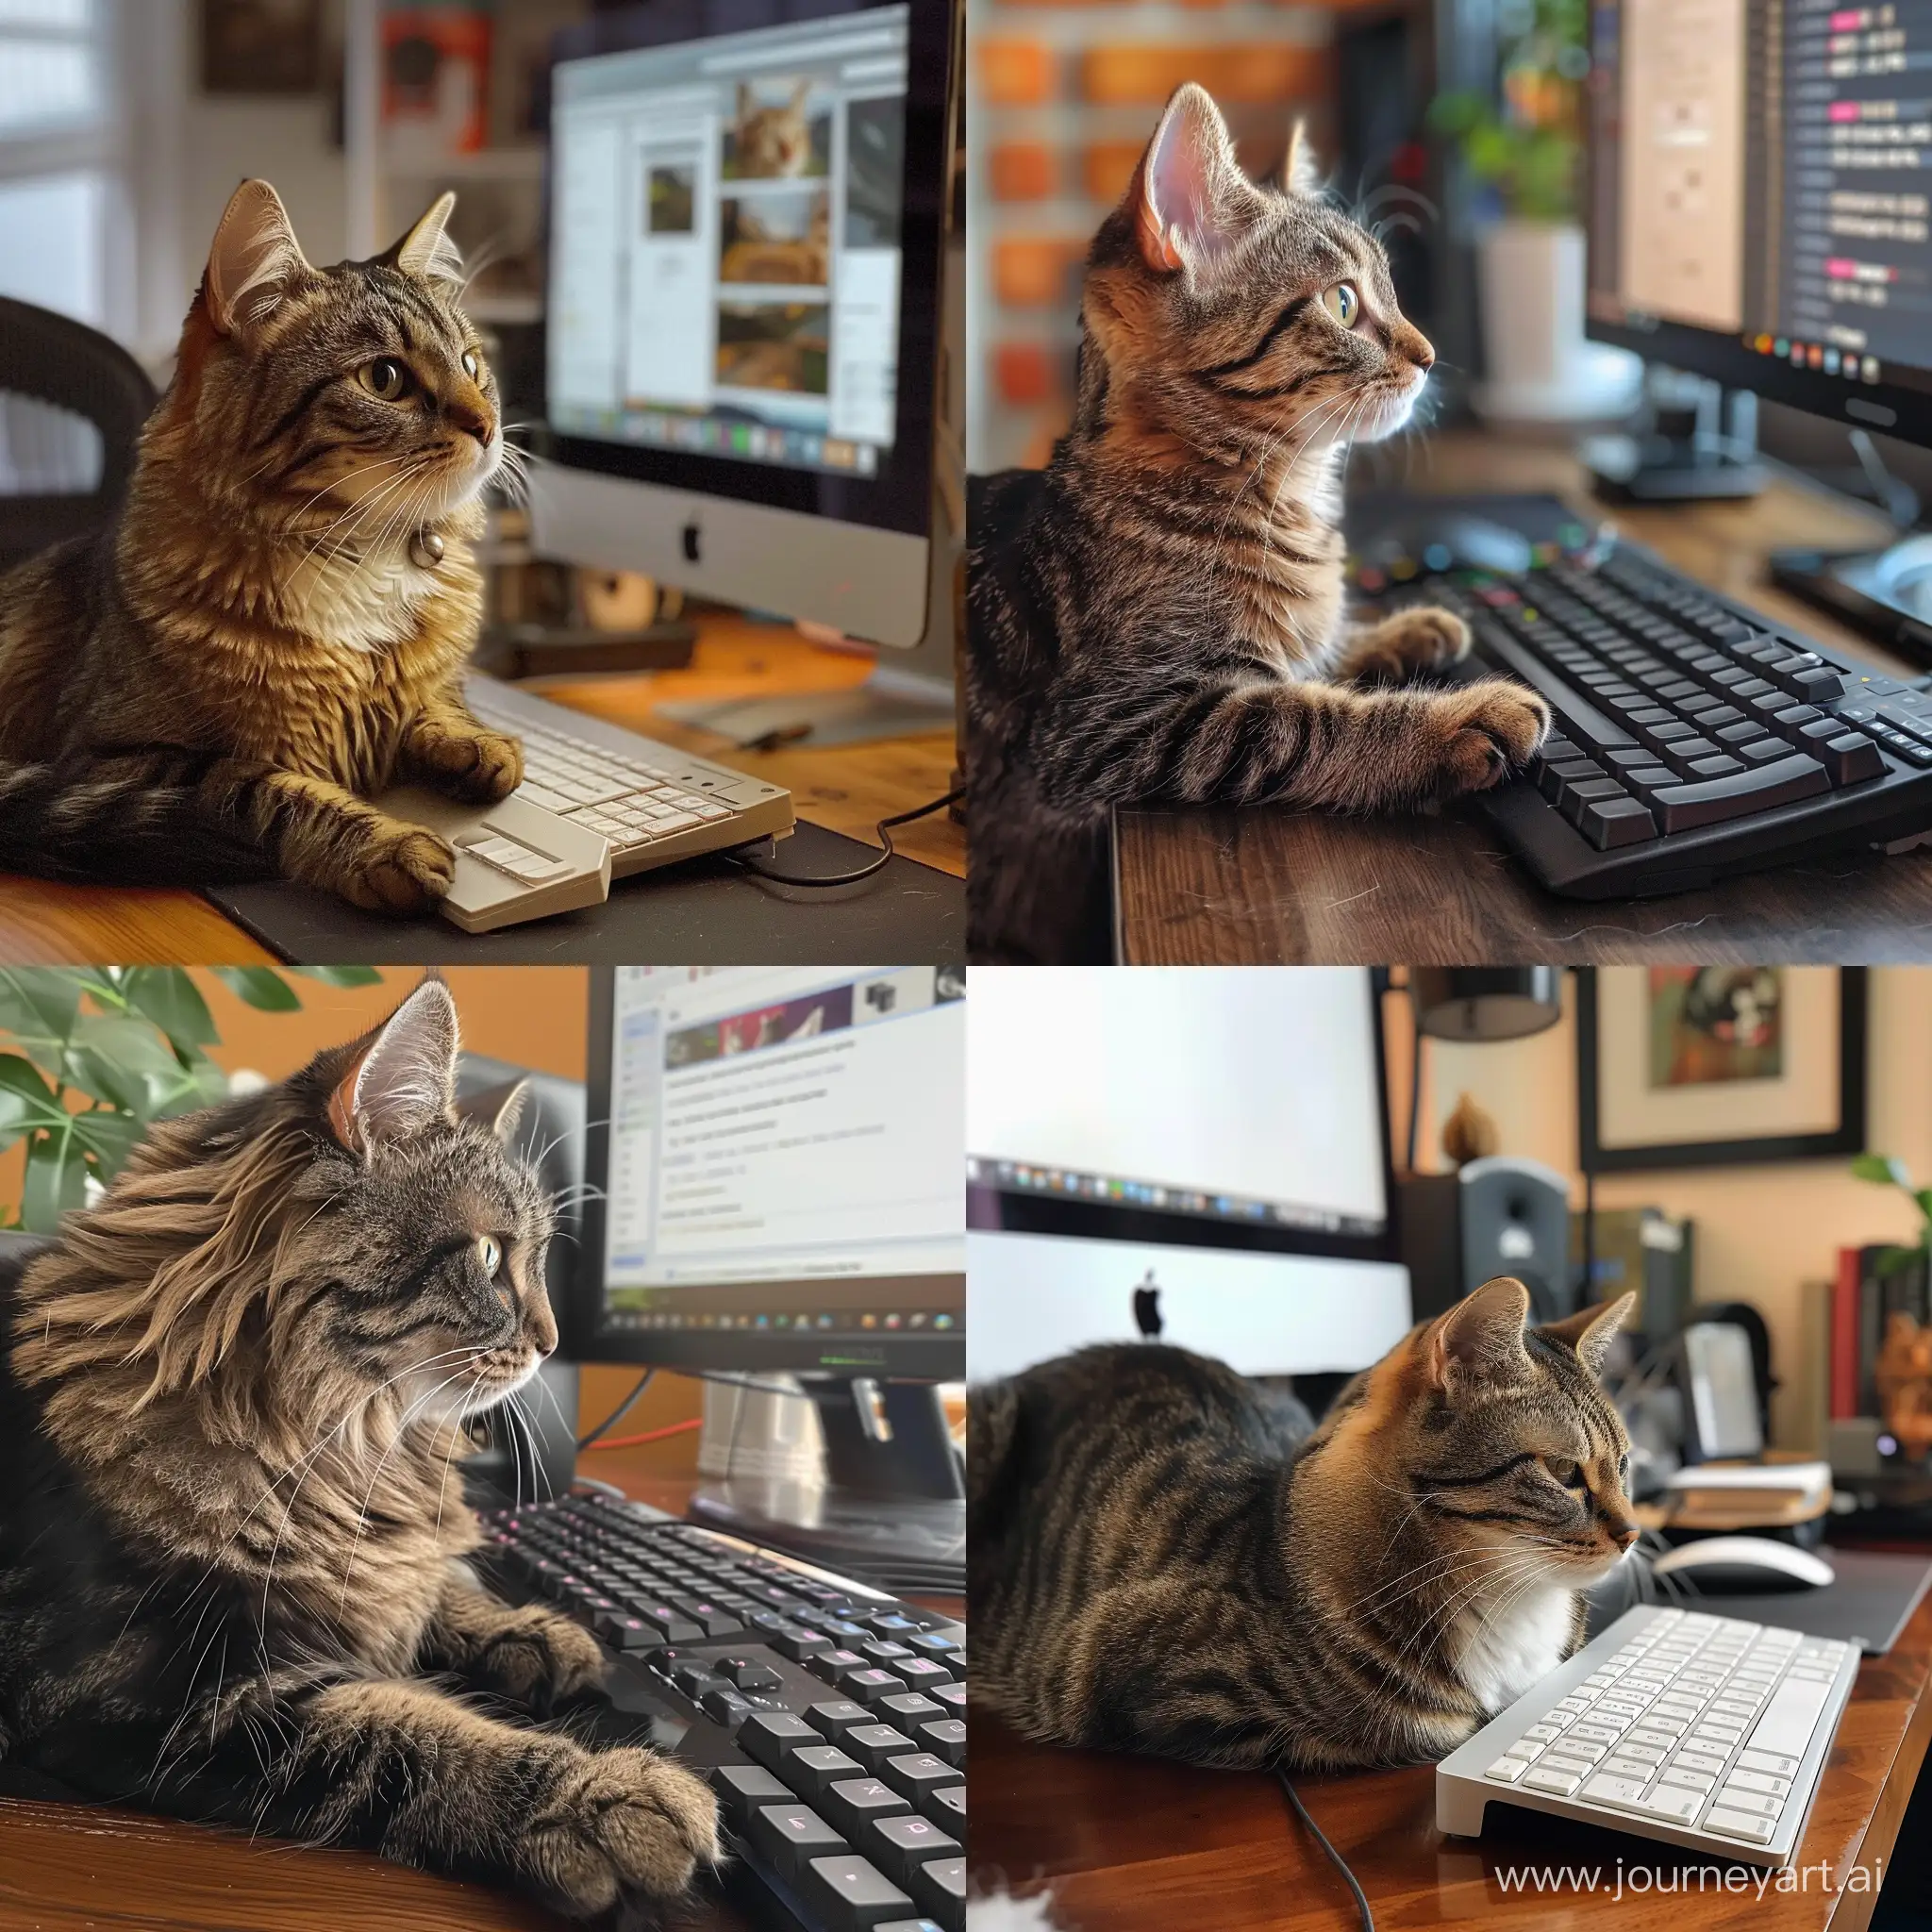 The cat at the computer